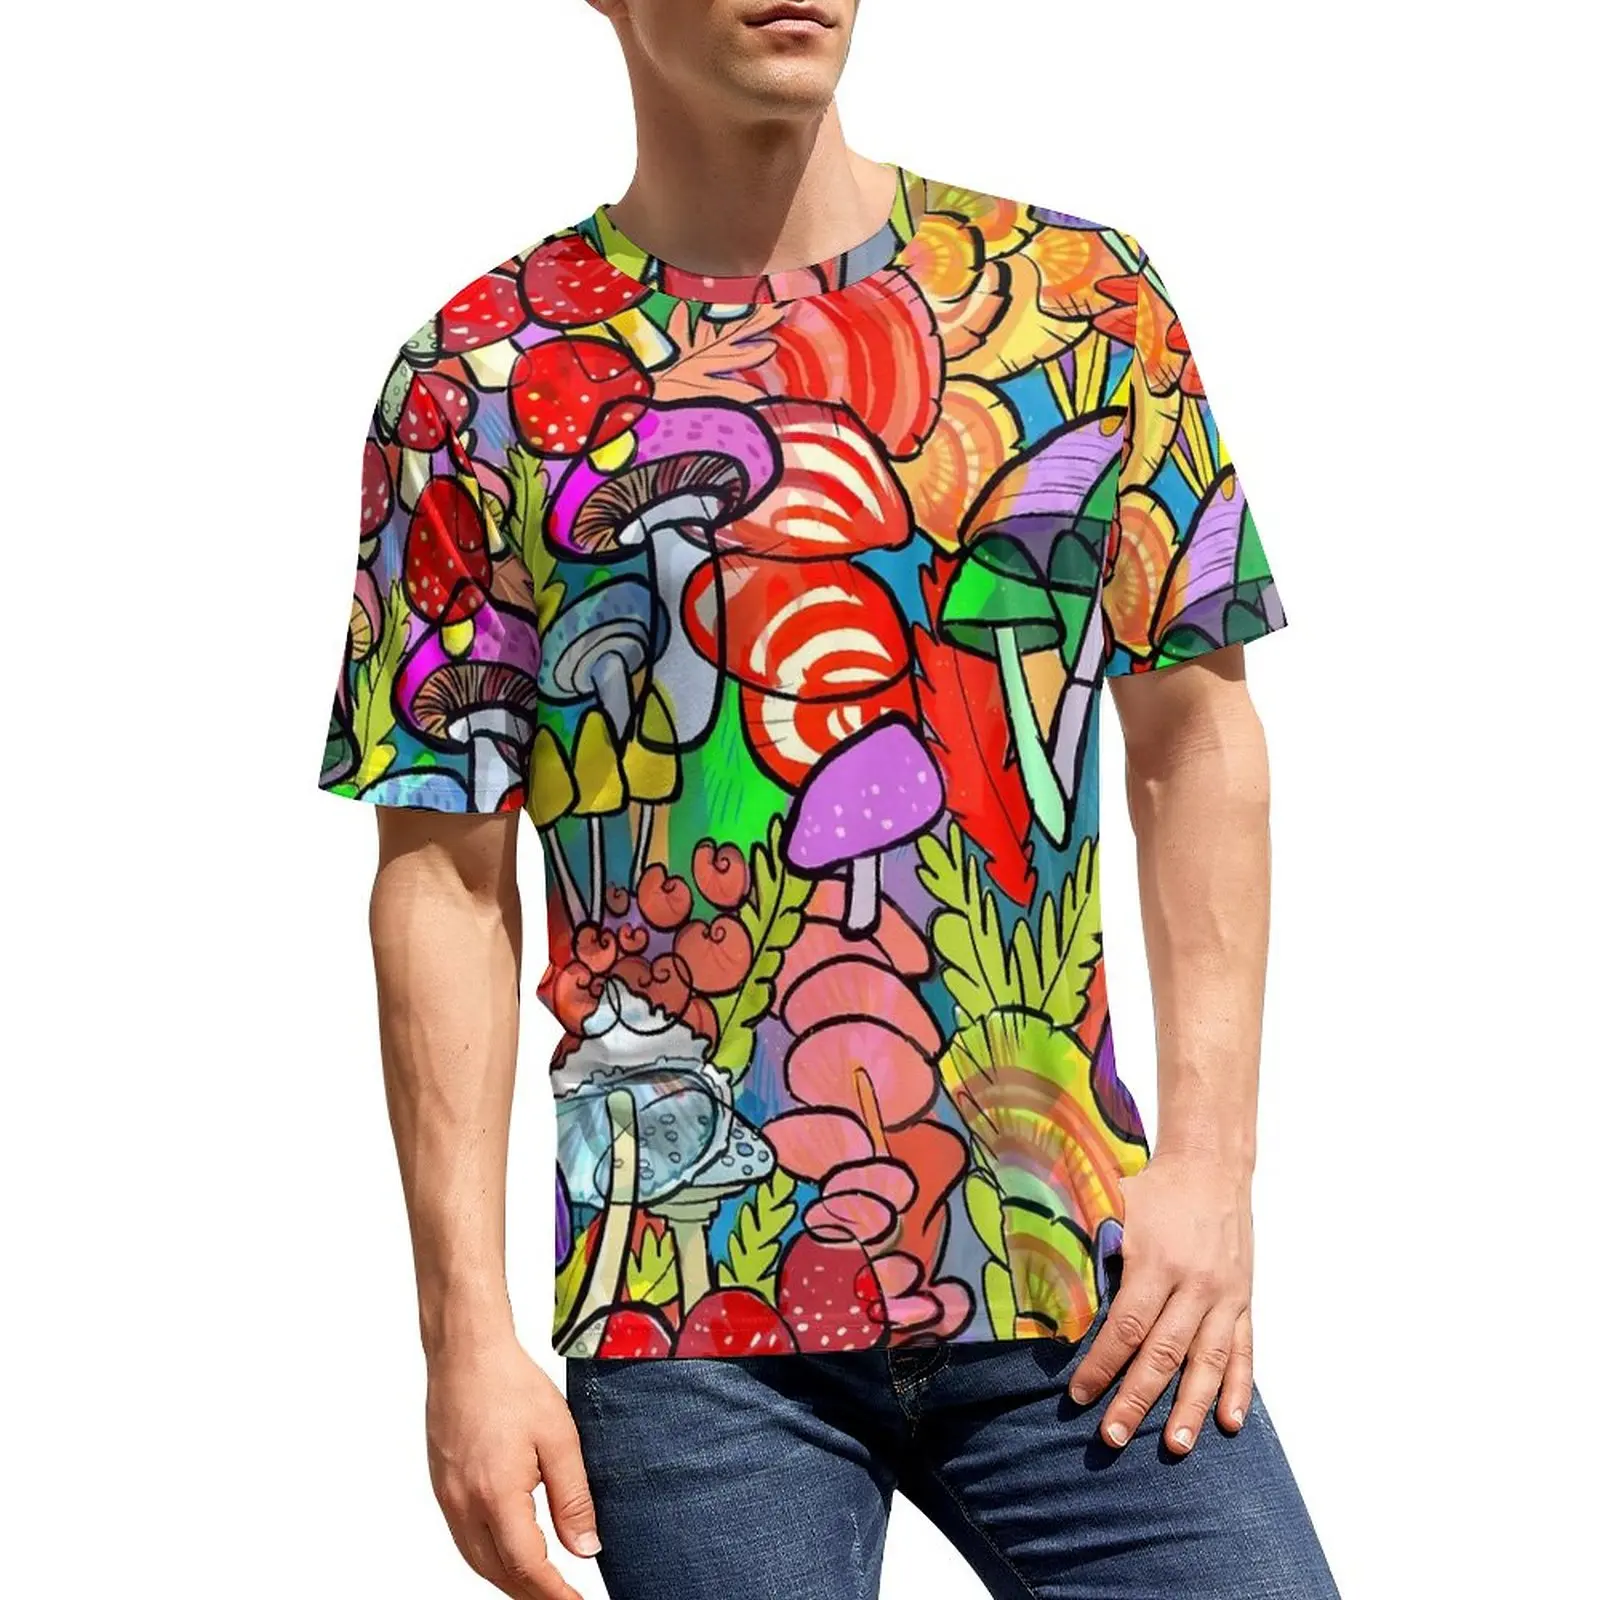 

Forest Appeared T Shirt Men Colorful Mushroom Street Style T Shirts Summer Fashion Tee Shirt Short-Sleeved Design Oversize Tops